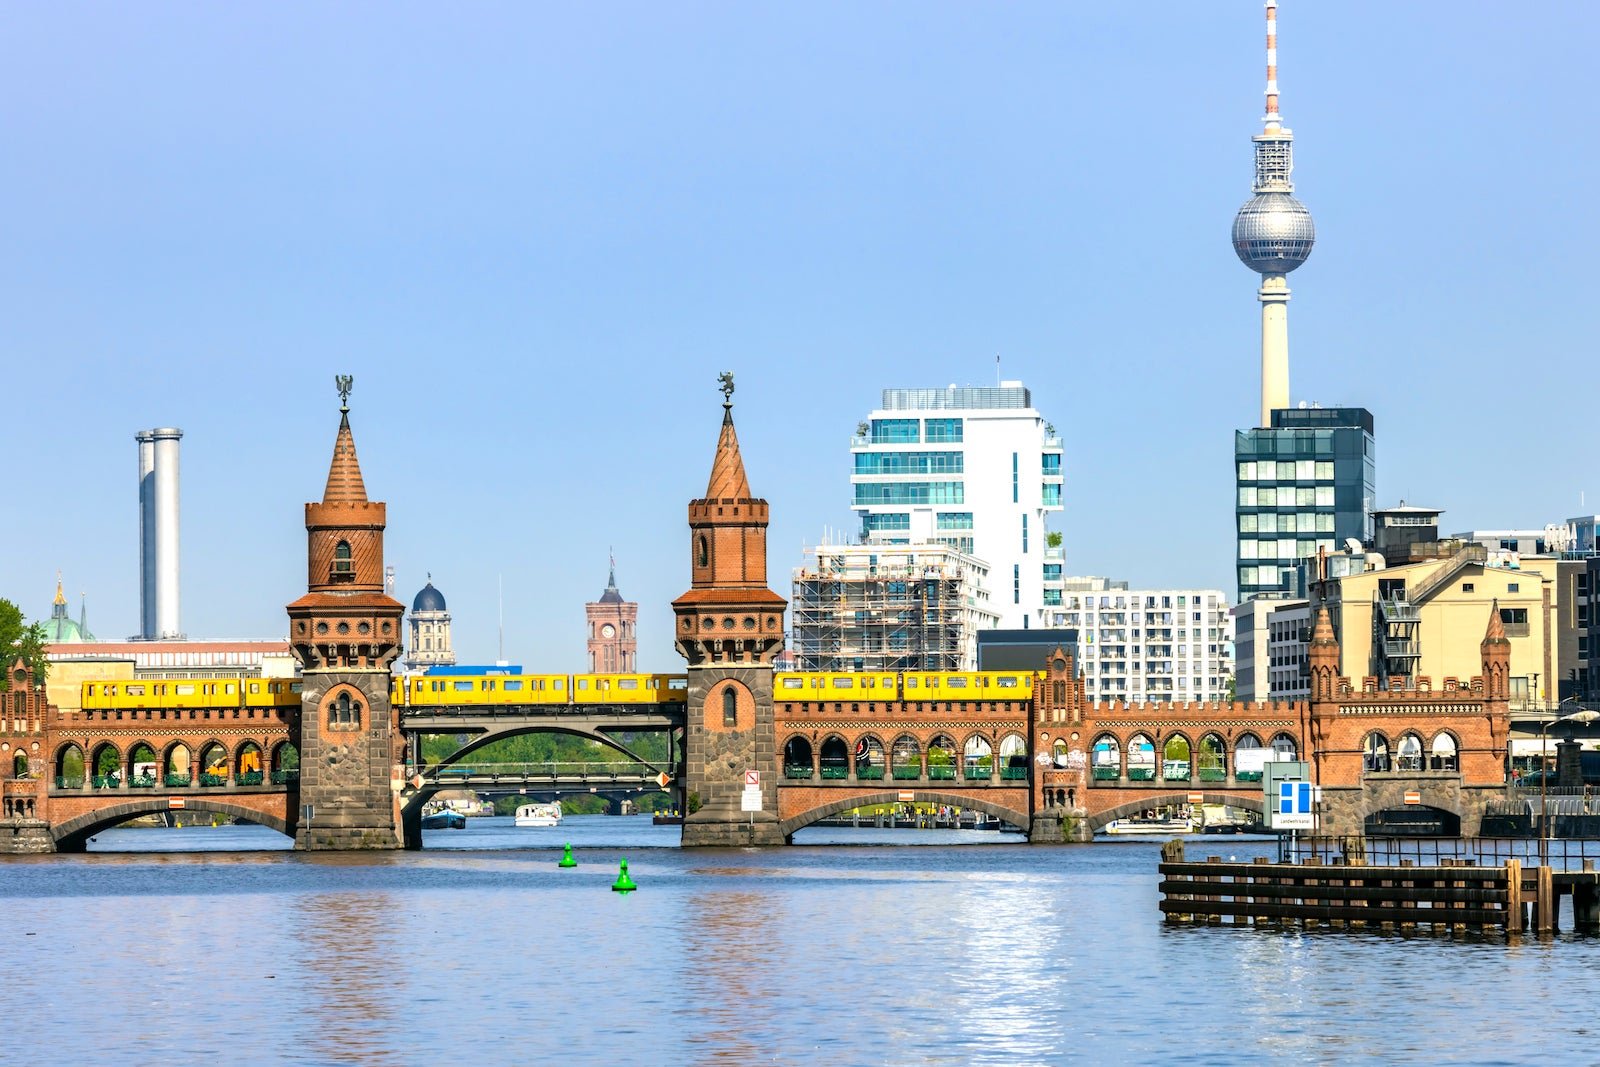 Pack your bags: Fly to Berlin and other European cities from $359 round-trip